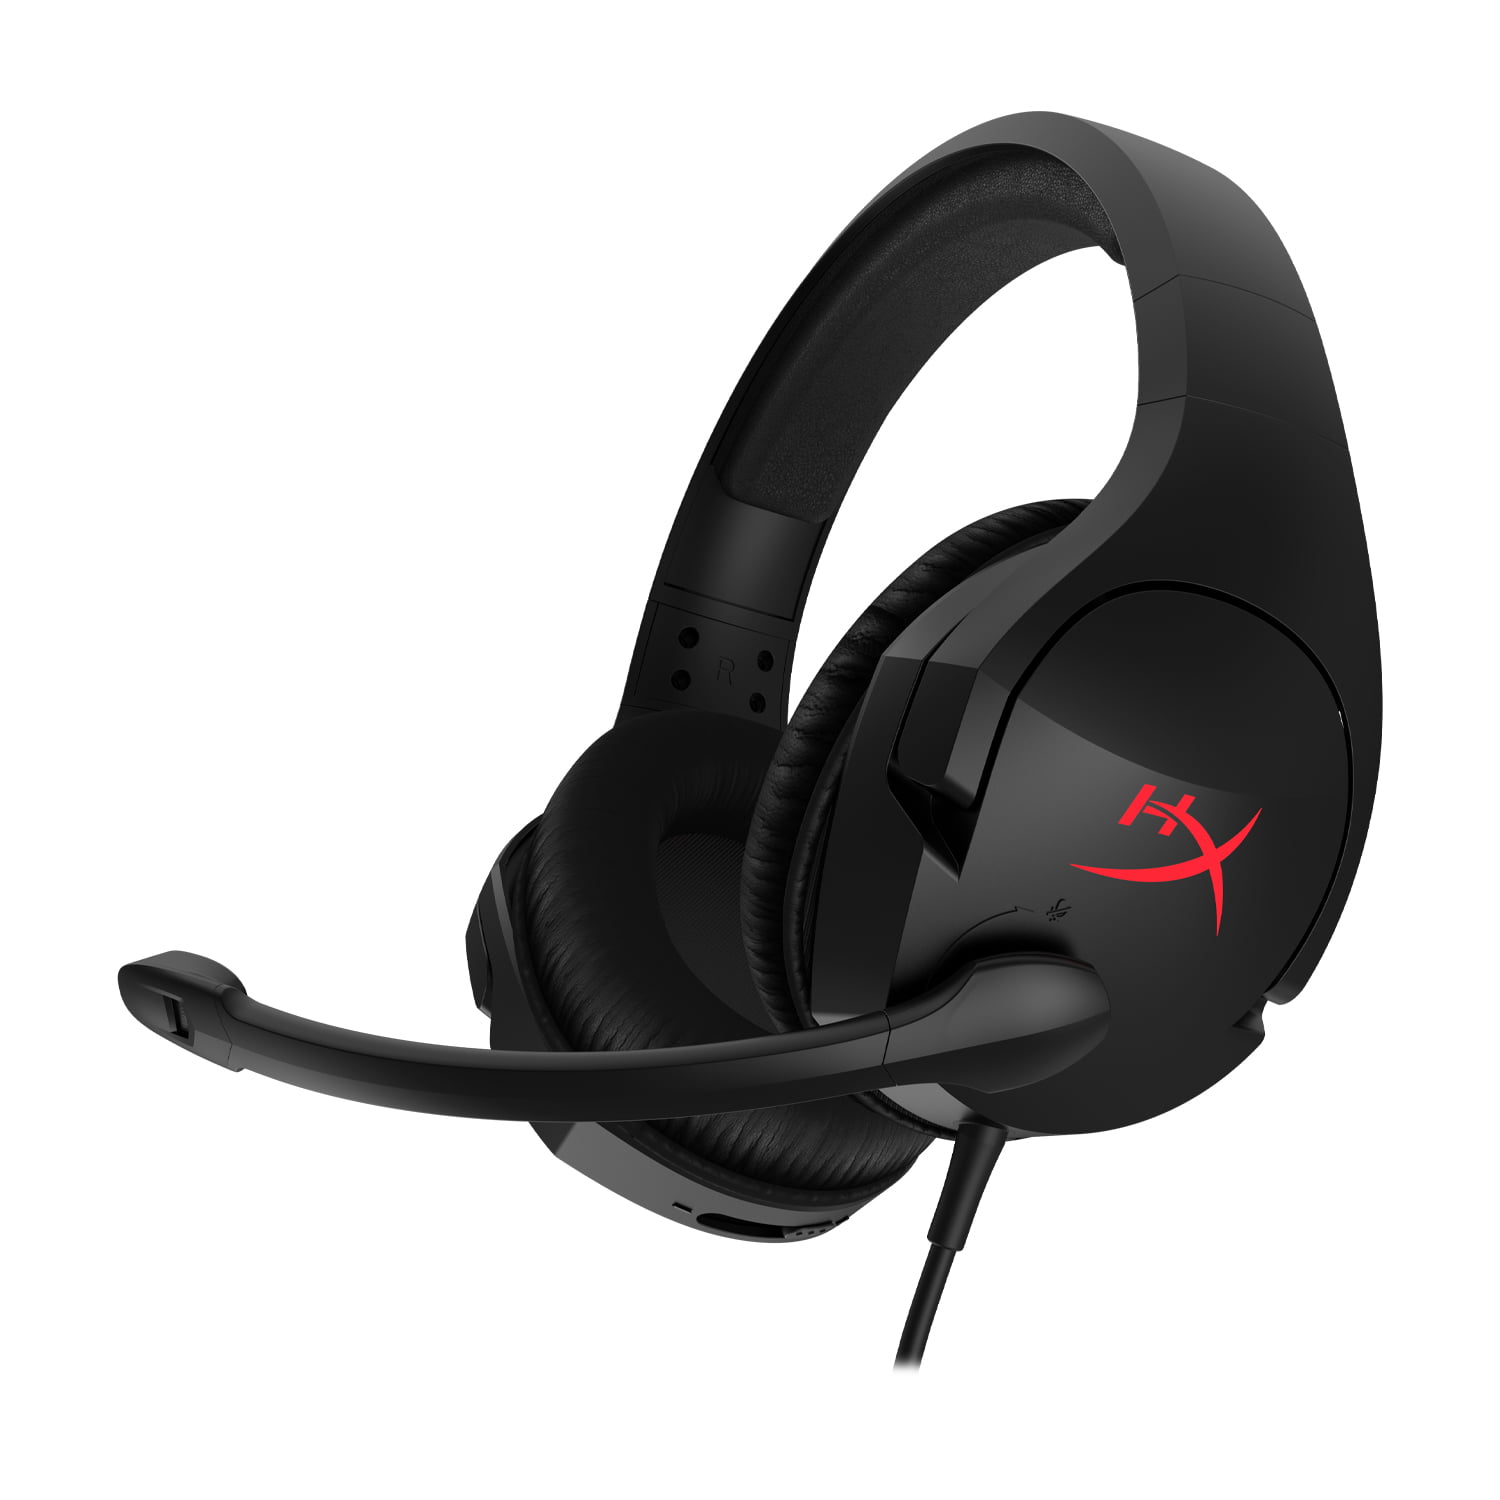 HyperX Cloud Stinger – Gaming Headset, Lightweight, Comfortable Memory Foam, 3.5mm connection, Noise-Cancellation Microphone, Works PC, PS4, PS5, Xbox One, Xbox Series X|S, Nintendo Switch, Mobile - Walmart.com